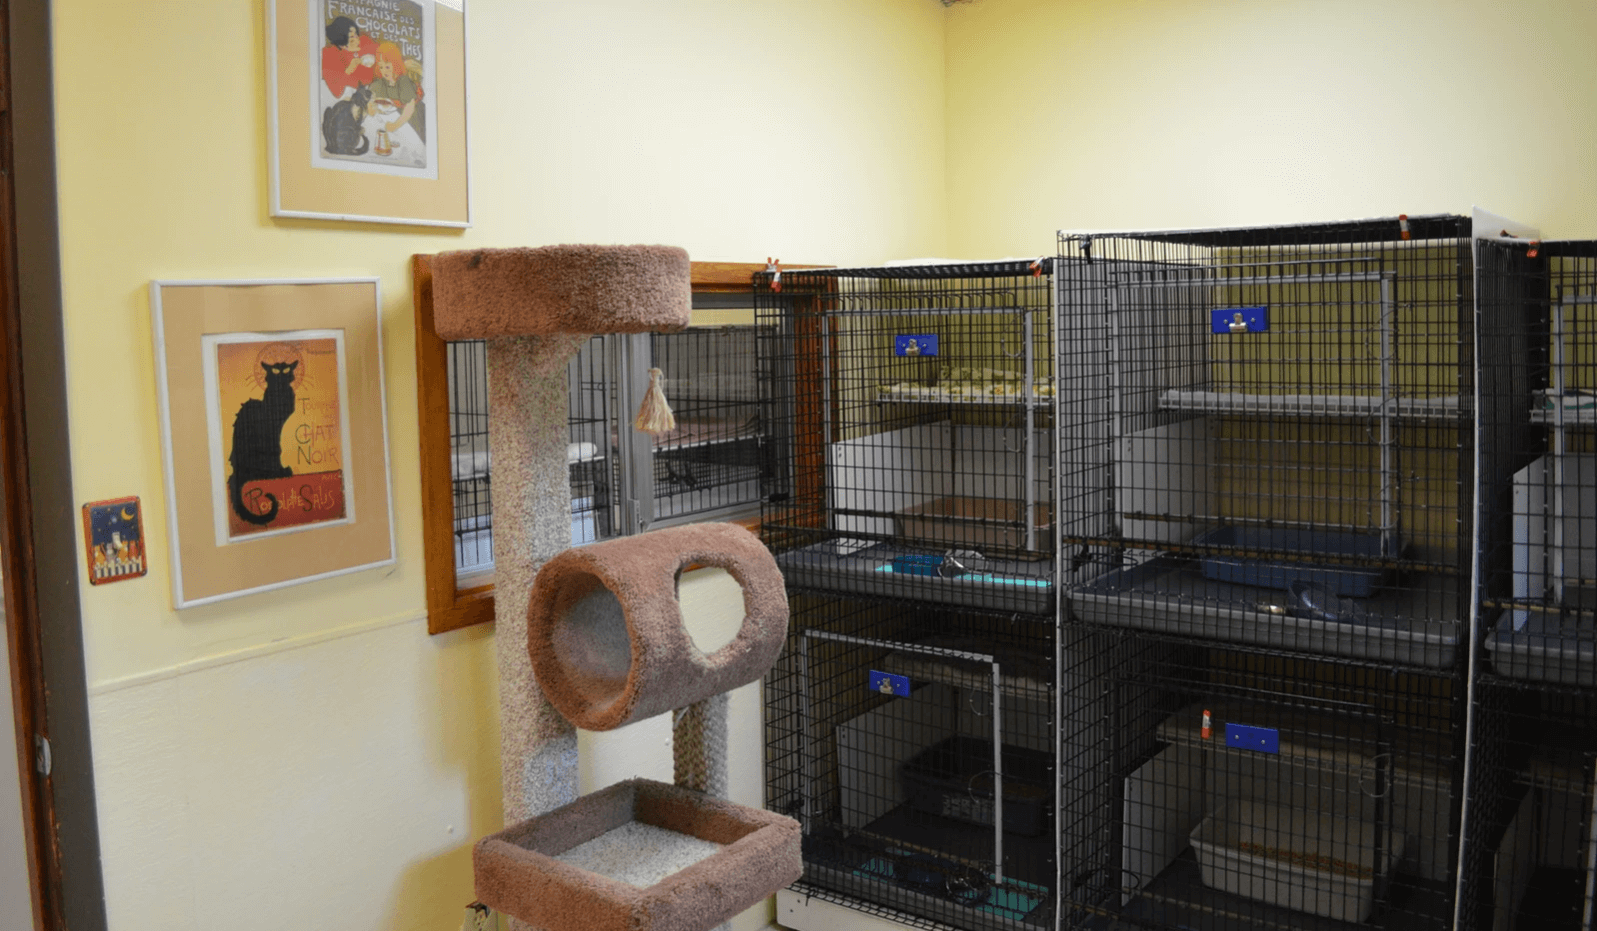 Cat Boarding in Seattle Best 3 Facilities Reviewed Raise a Cat